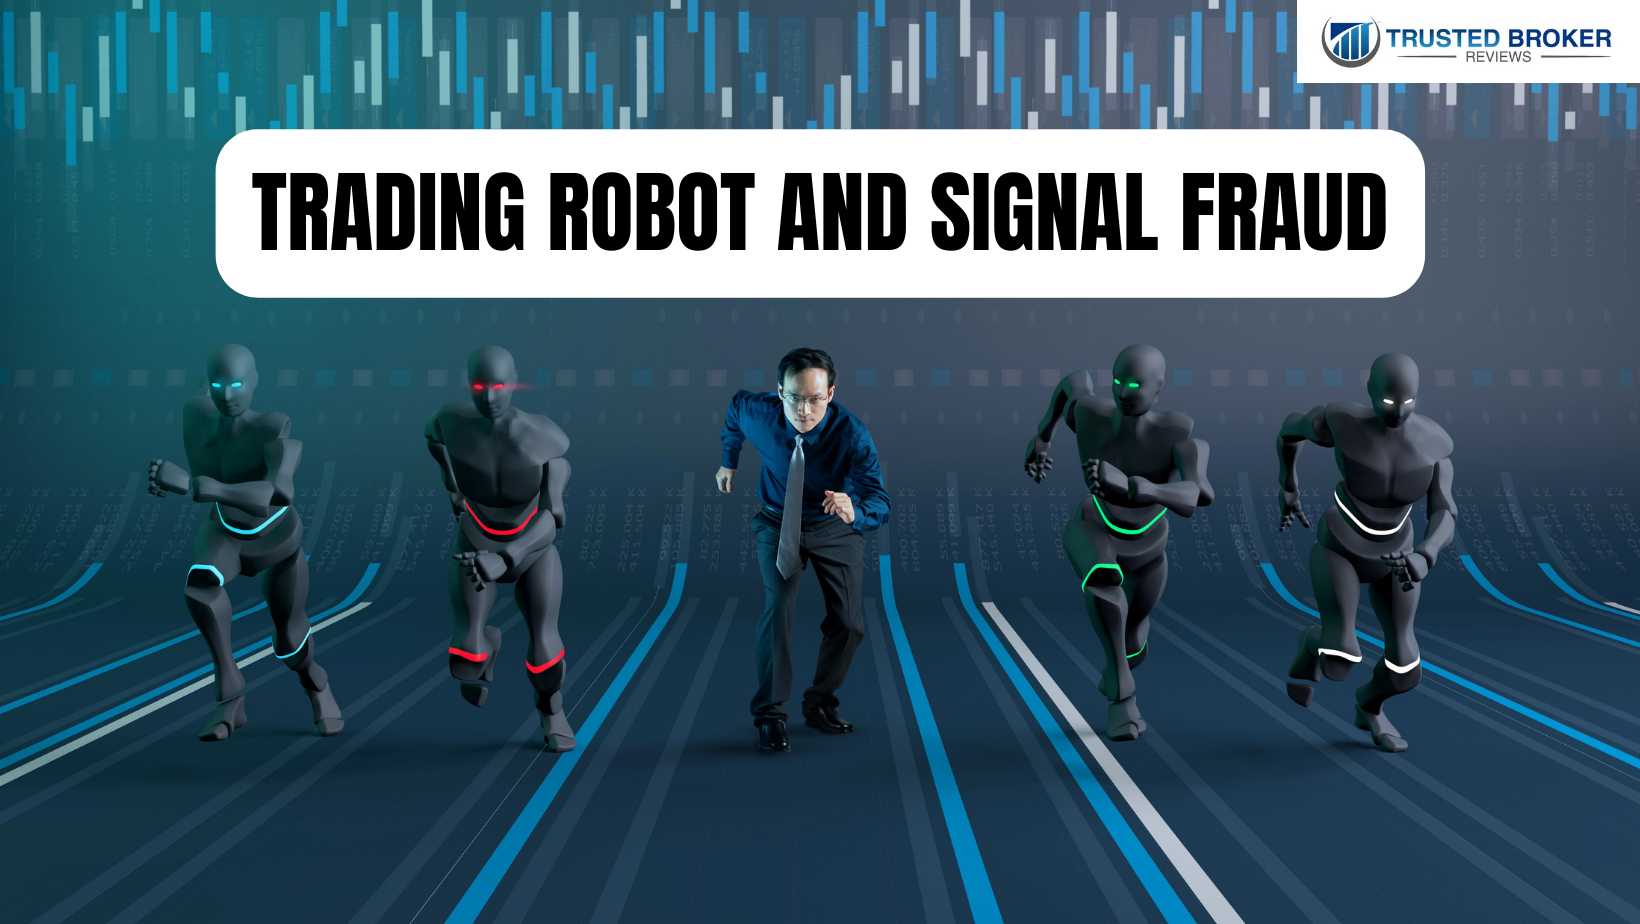 Trading robot and signal fraud